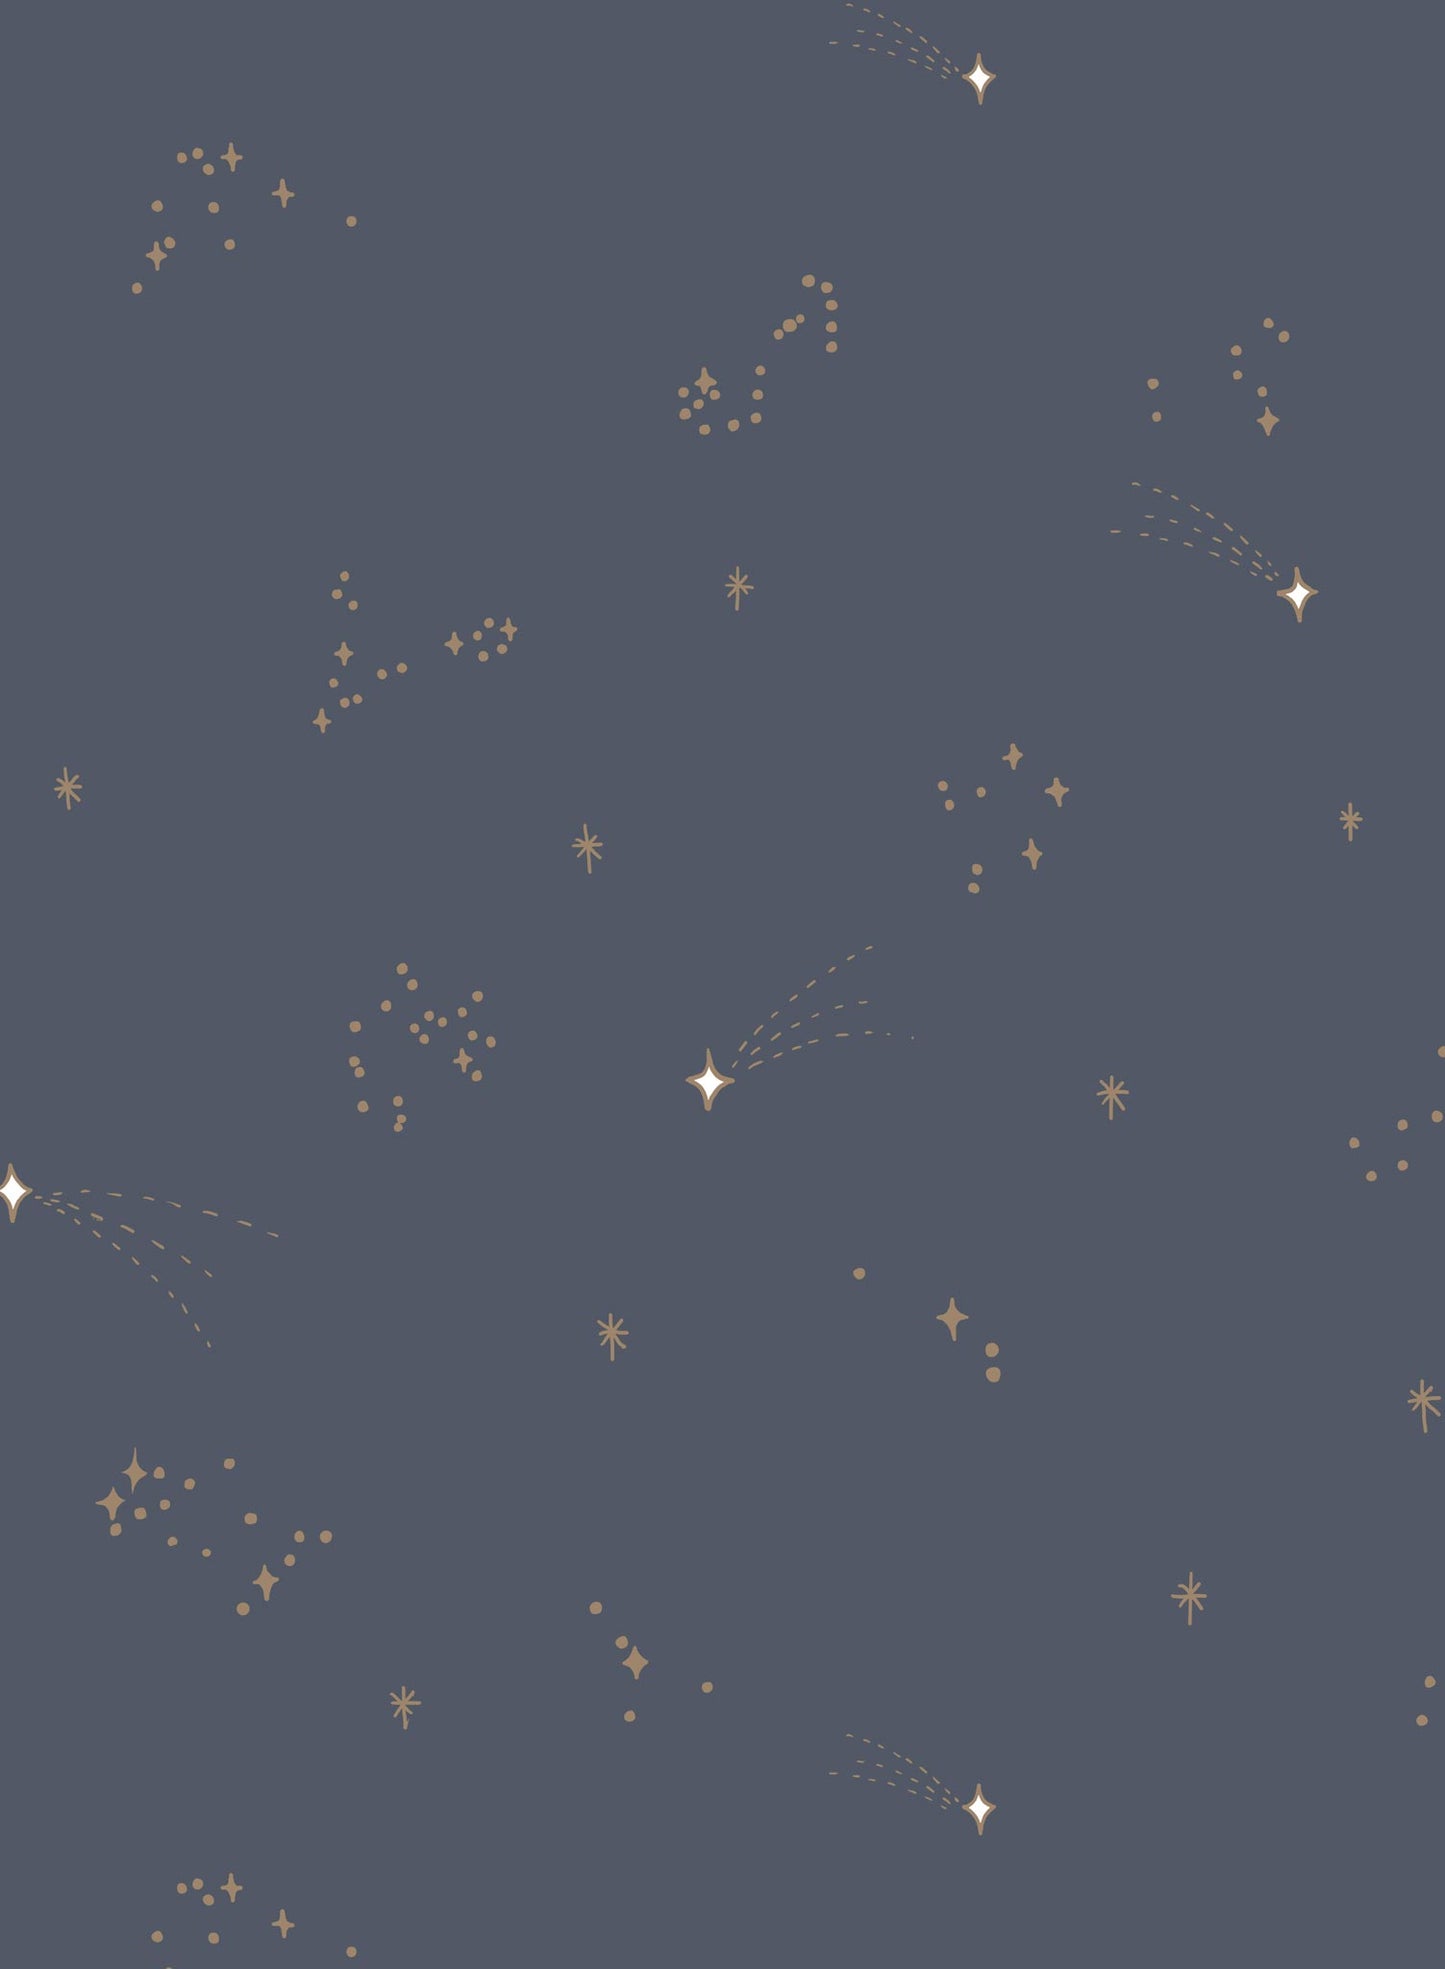 You're a Star Kid is a Minimalist wallpaper by Opposite Wall of a starry sky.